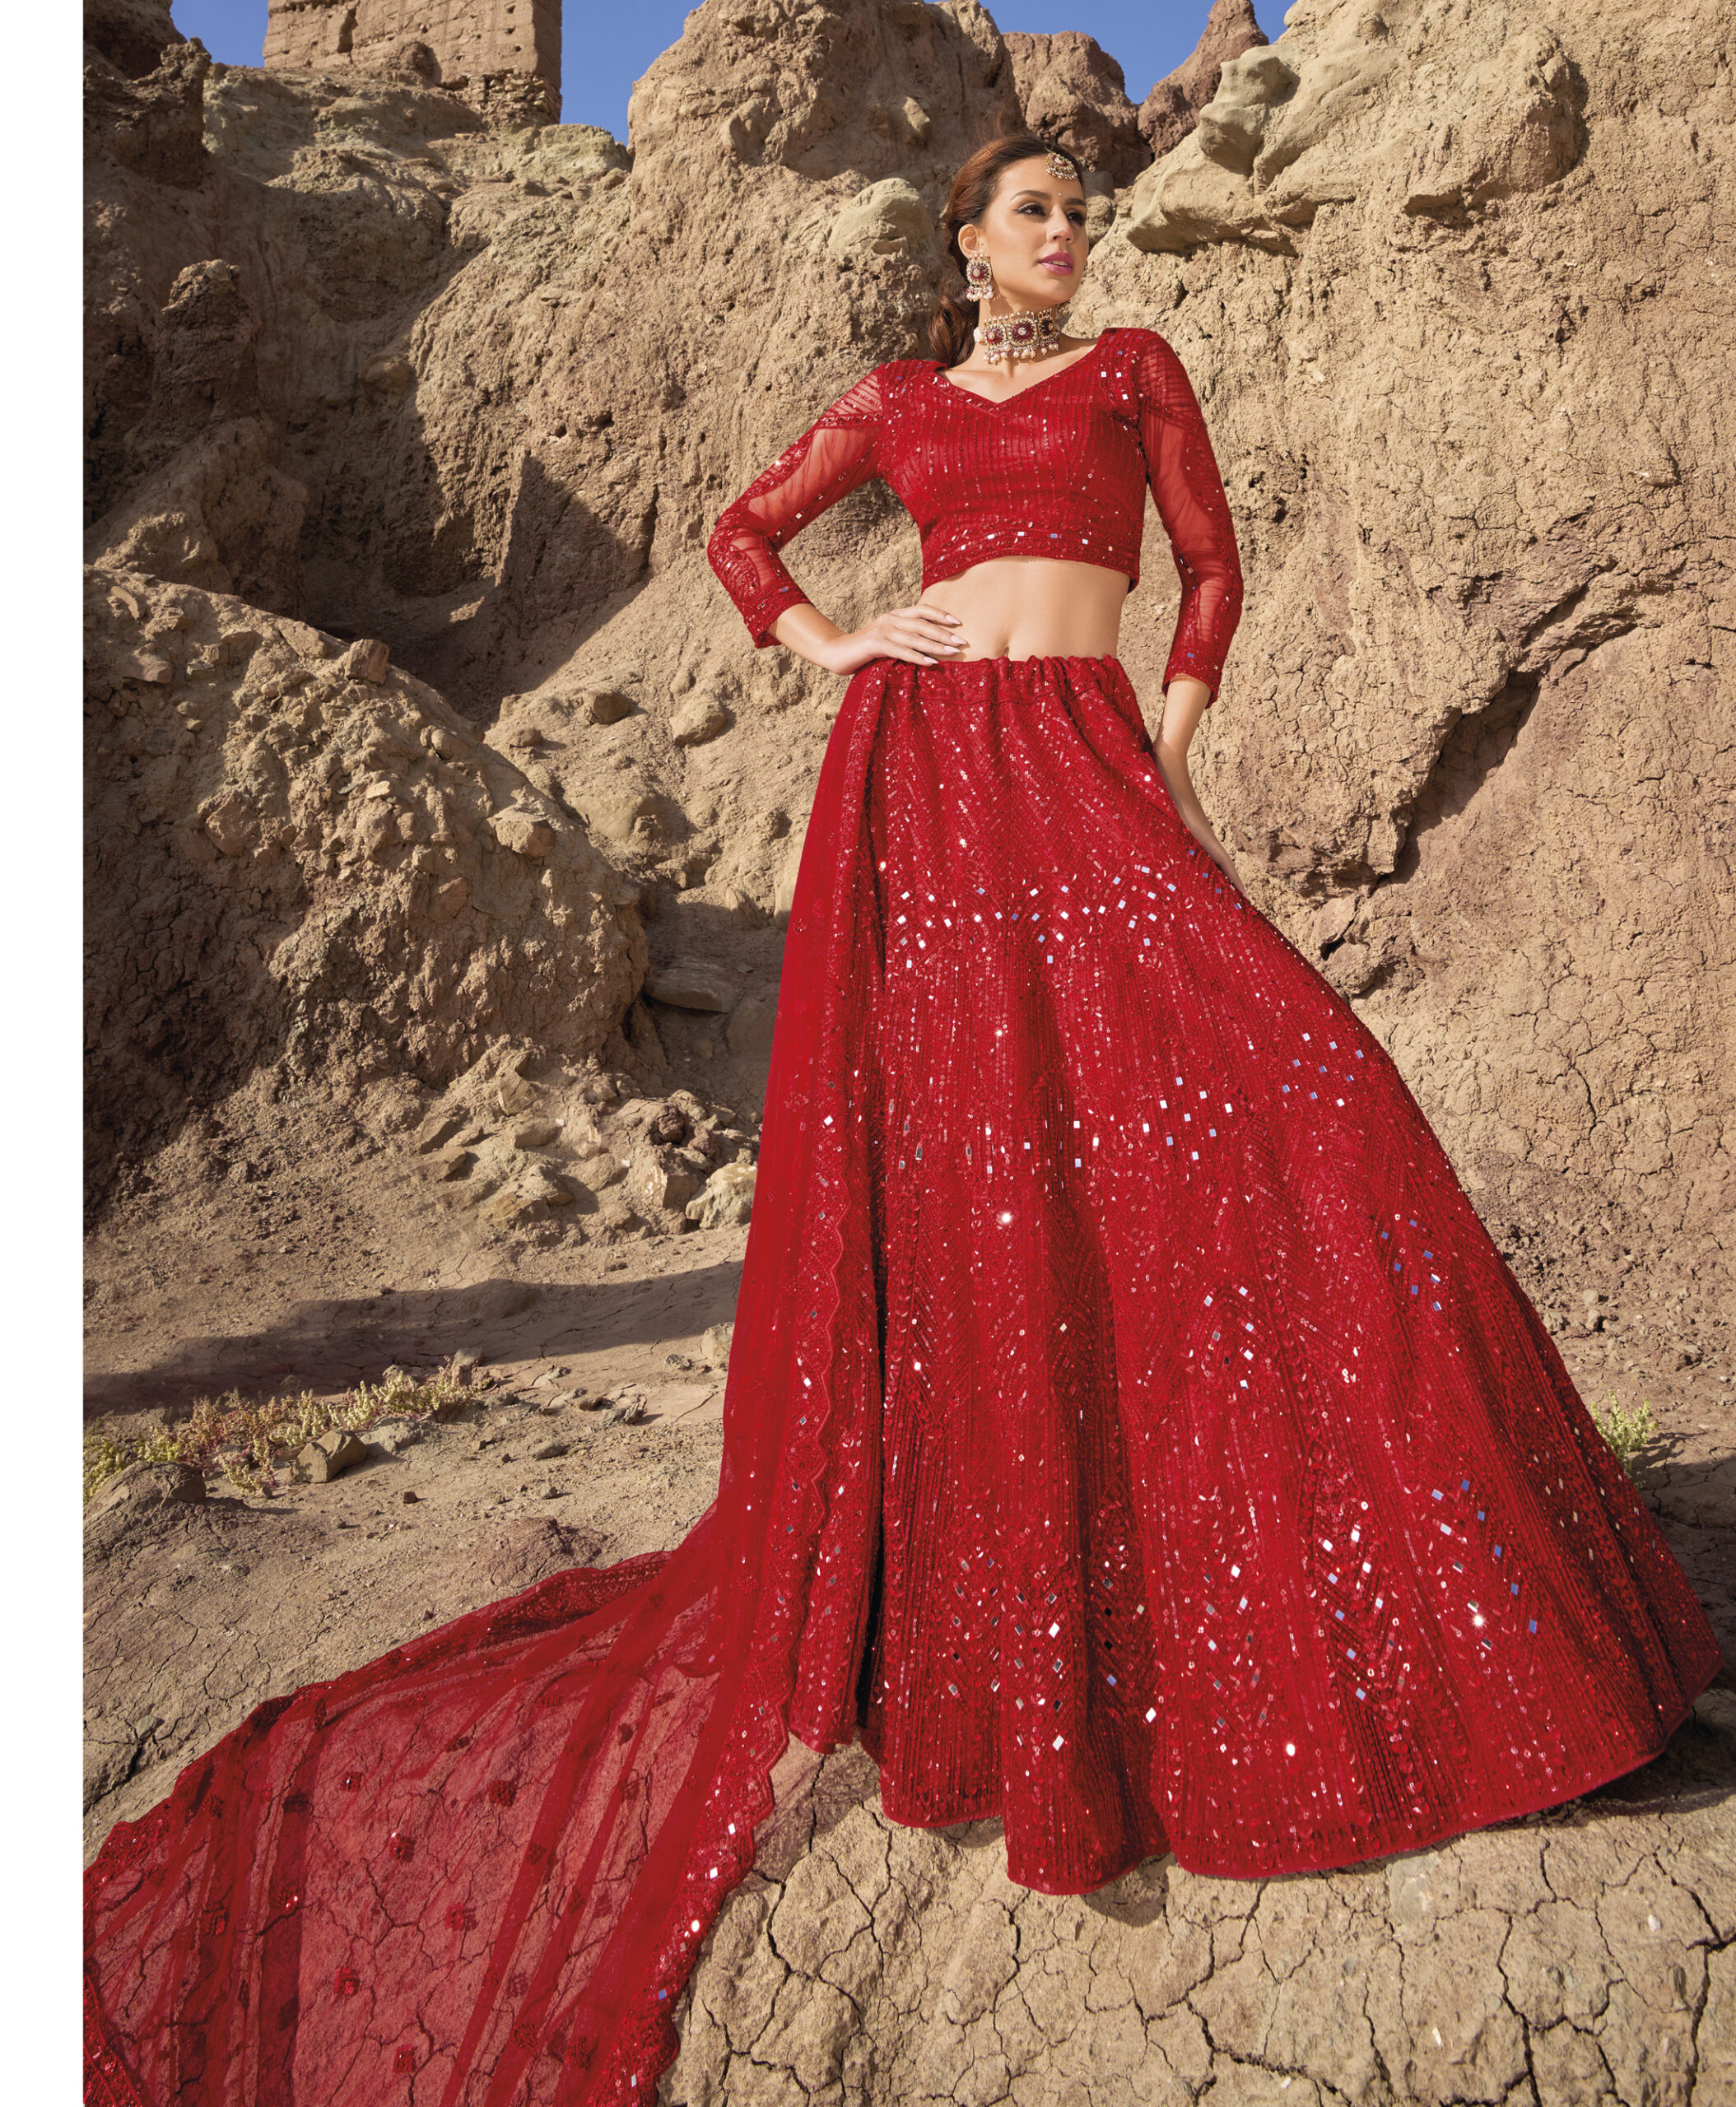 Wedding Lehenga Trends For Brides-To-Be & Bridesmaids – The Loom Blog